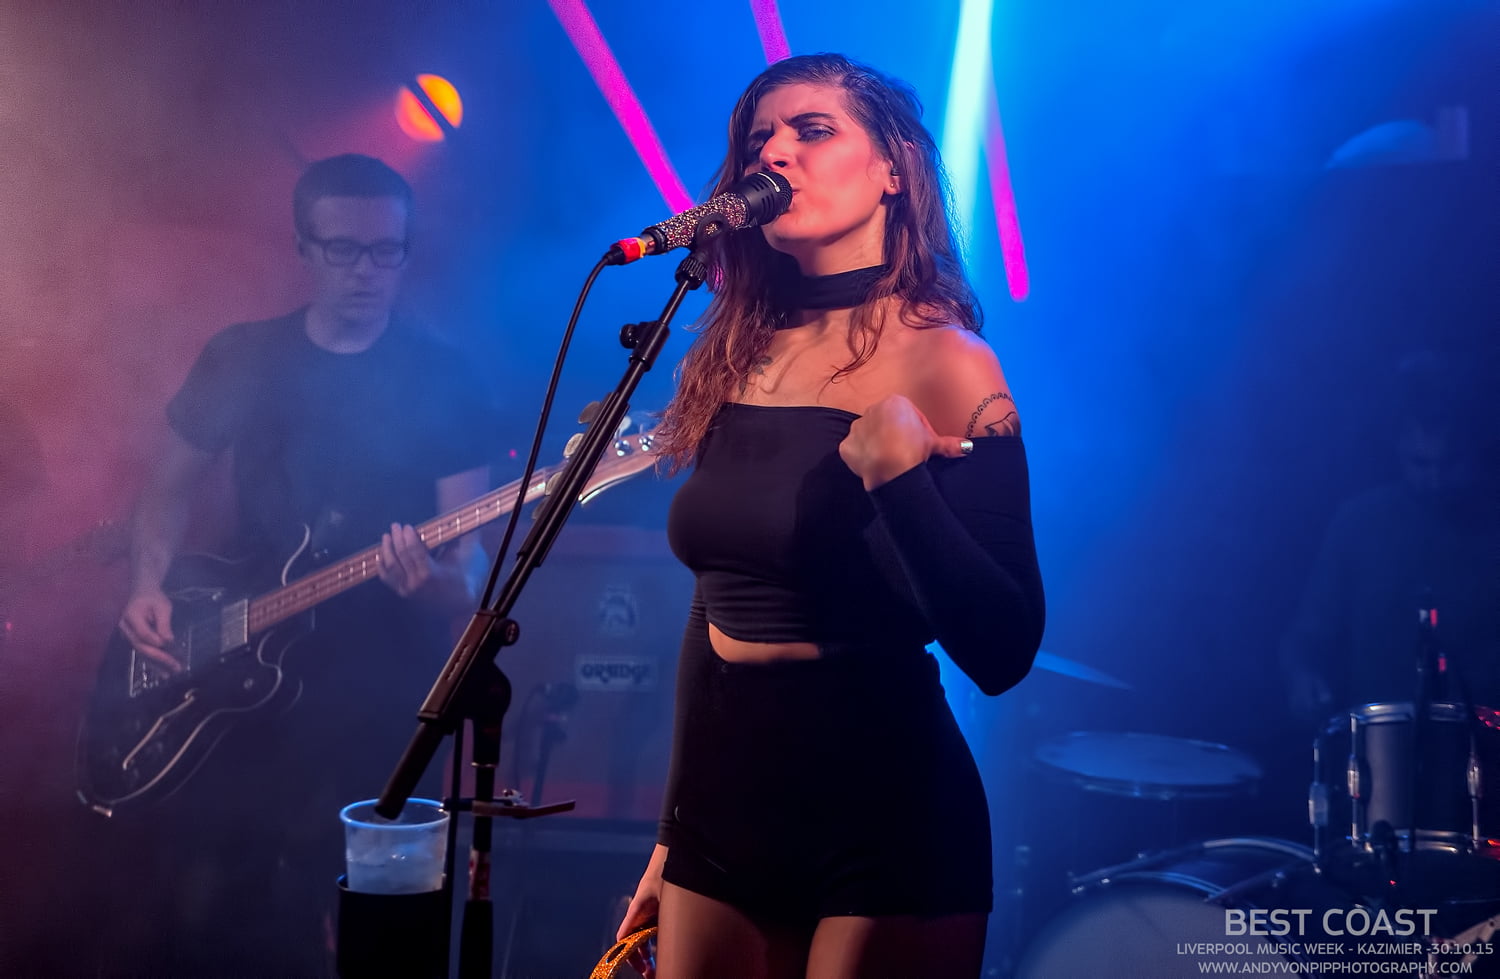 The VPME | IN PICTURES :  BEST COAST - LIVE - LIVERPOOL MUSIC WEEK 30.10.15 1